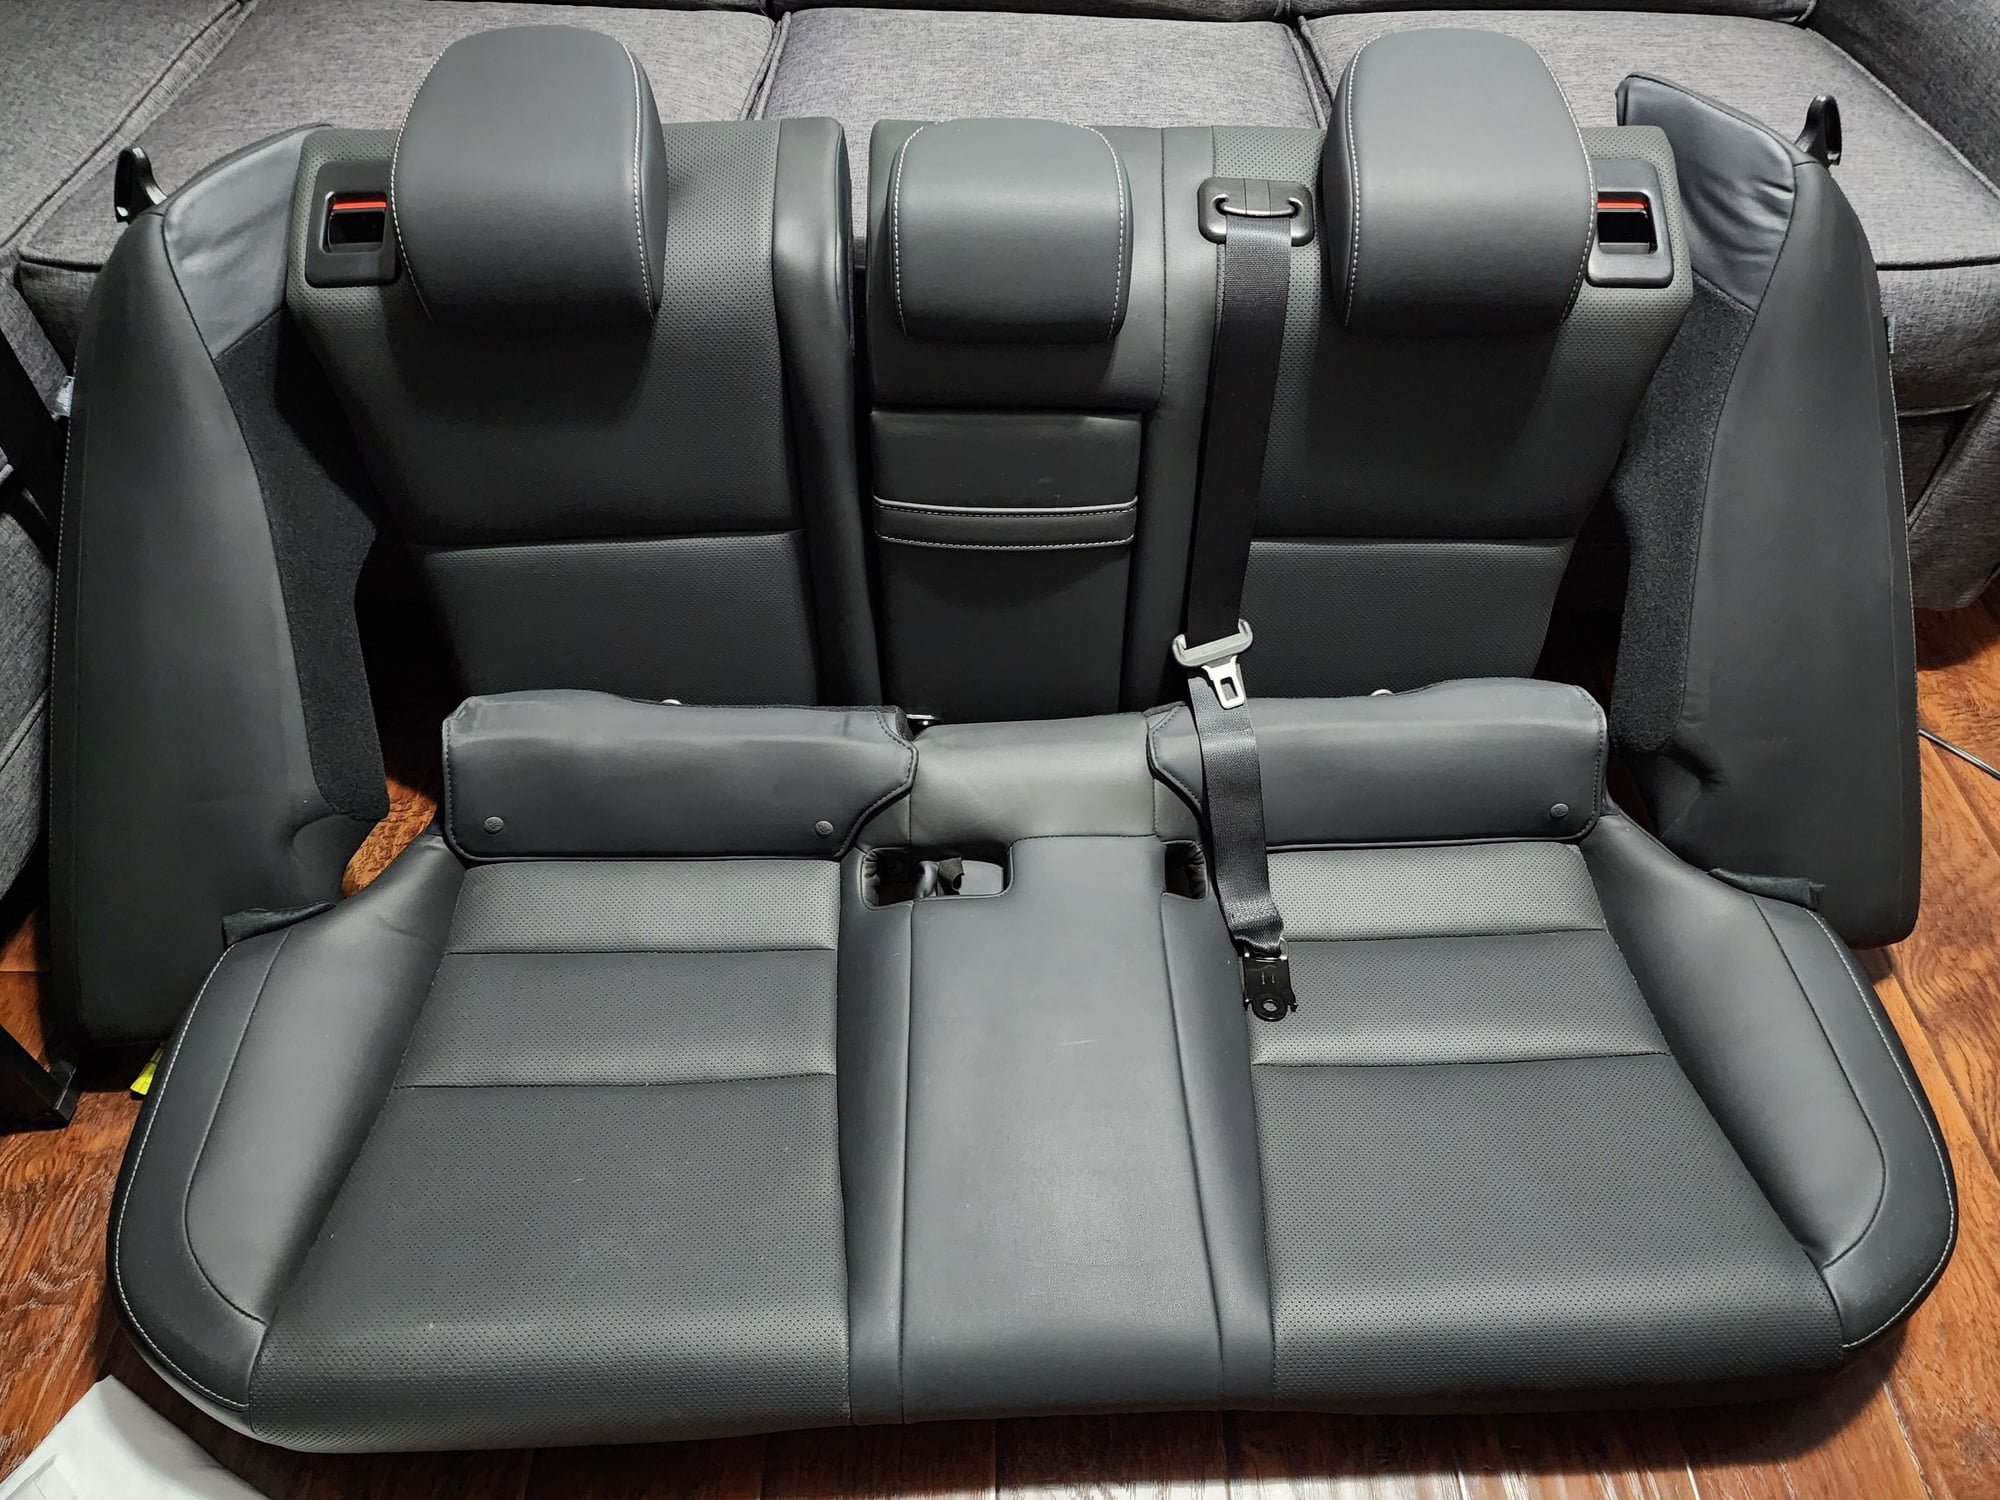 Interior/Upholstery - IS200T Seats, Door Panels and IS350 F Sport Switch covers + Memory Seat Buttons - Used - -1 to 2025  All Models - Montreal, QC H1N3R5, Canada